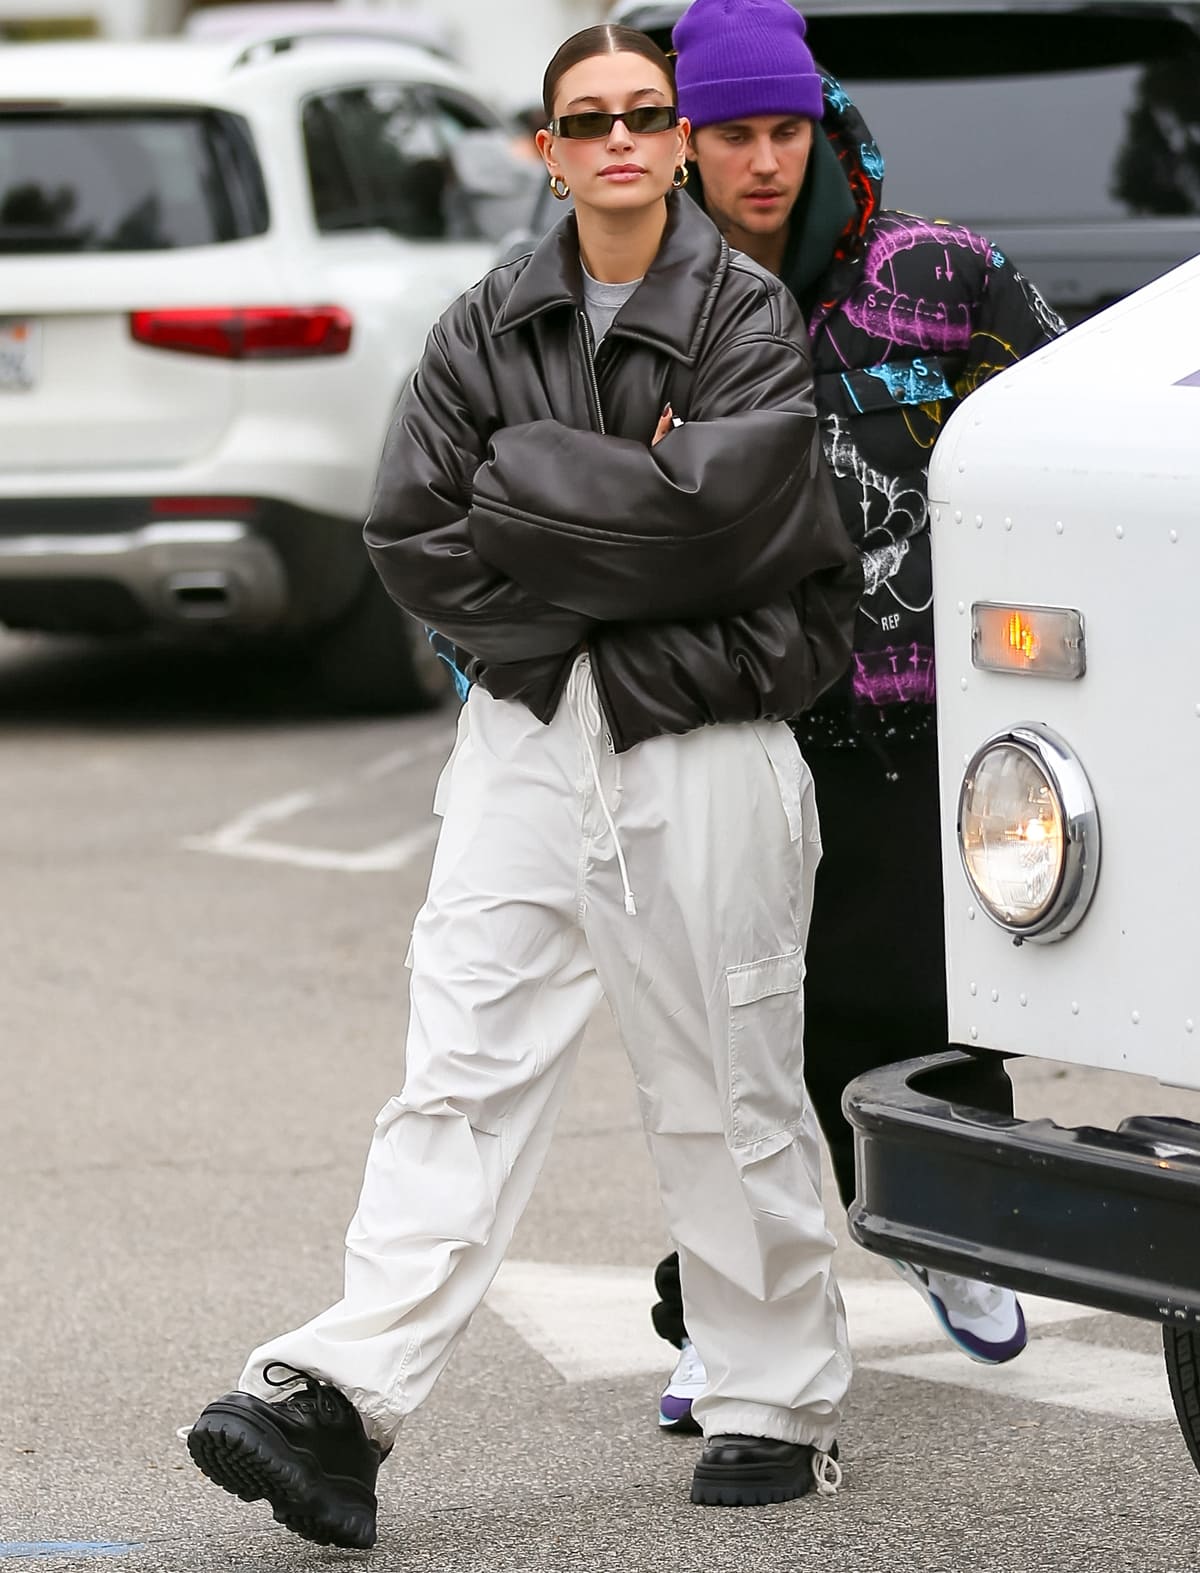 Hailey Bieber elevates her style with an Acne Studios bomber jacket, Local European Le Cargo pants, and sleek Eytys Angel sneakers